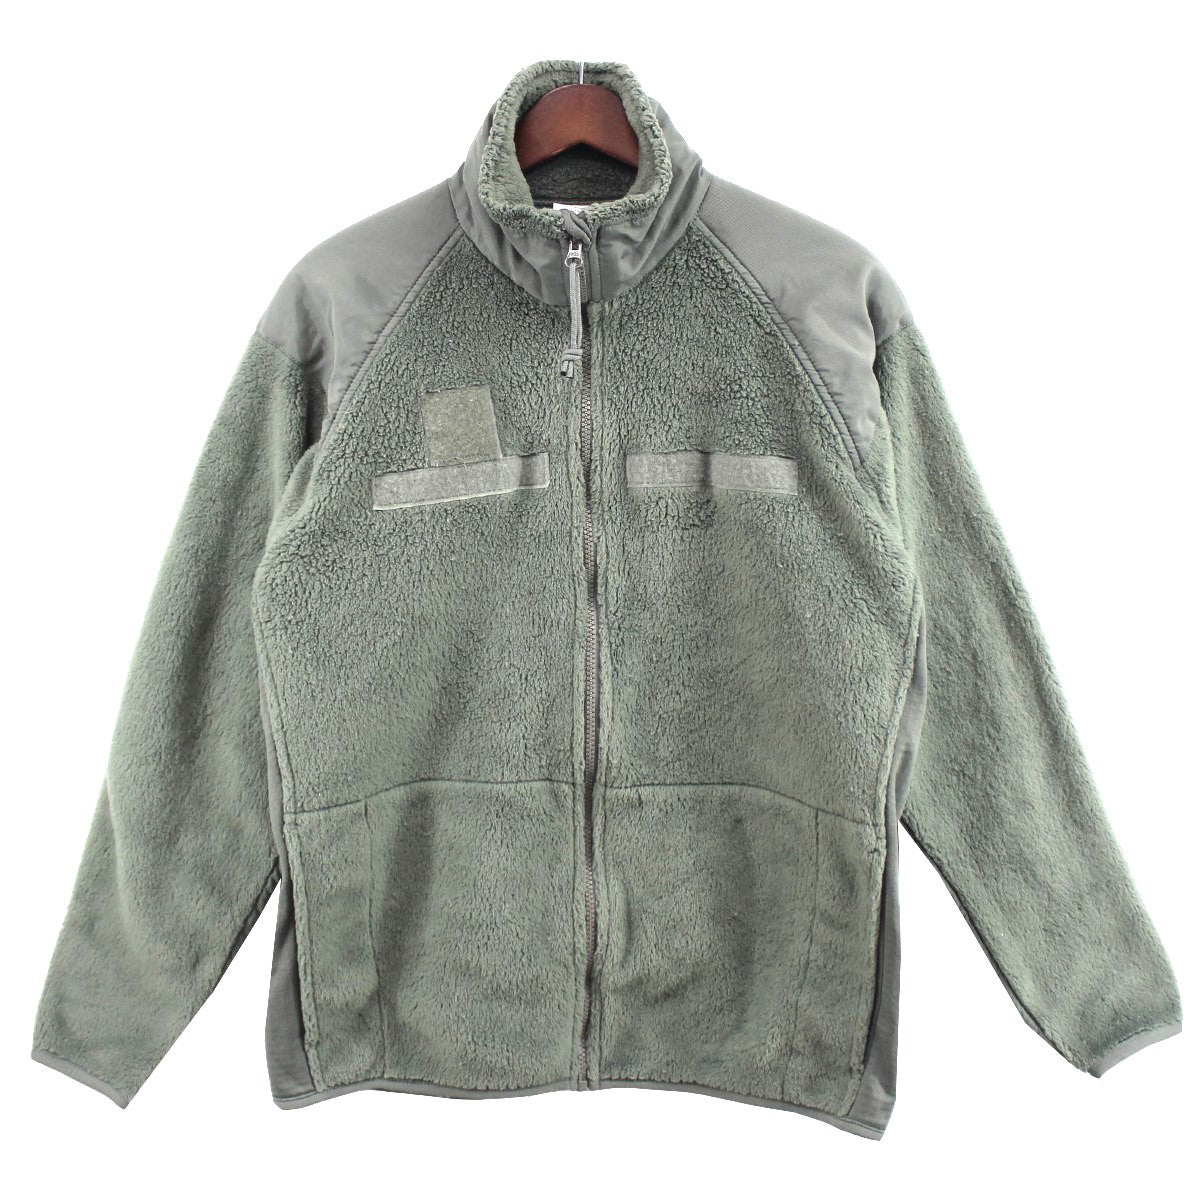 U．S．ARMY(ユーエスアーミー) US ARMY FLEECE COLD WEATHER (GEN 3 ...